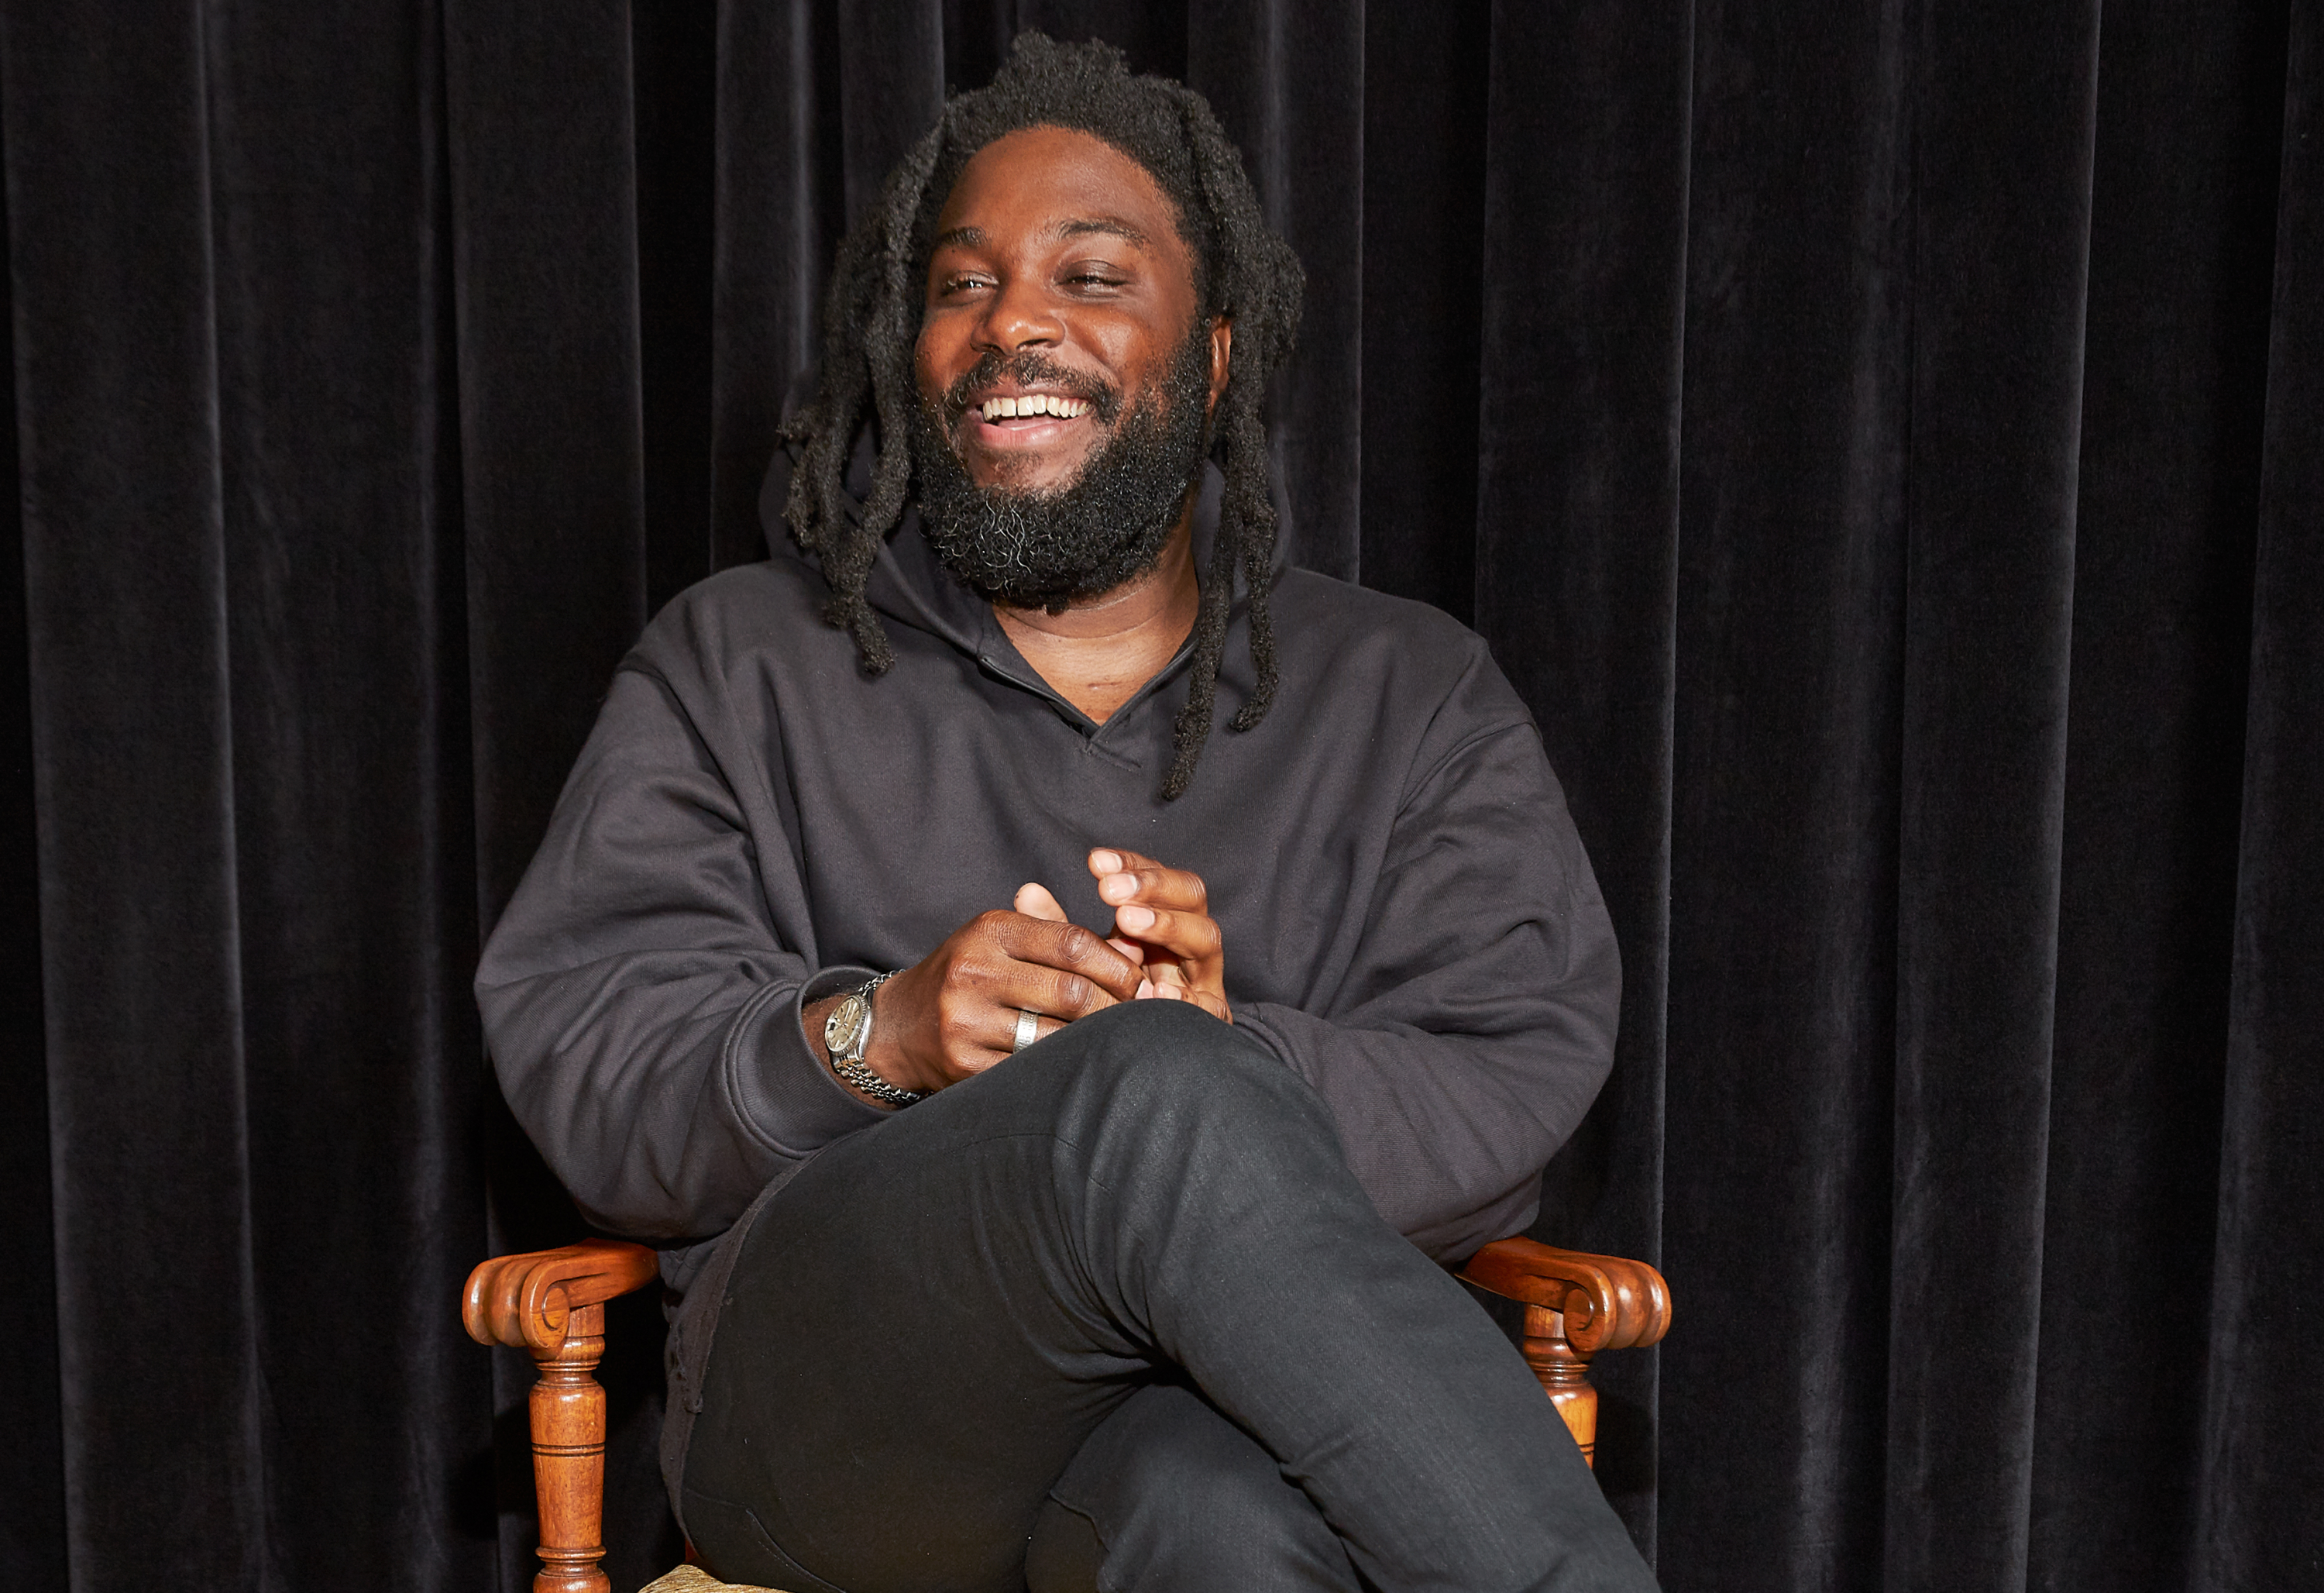 Jason Reynolds Bought Up All His Novels From Indie Bookstores—to Give Them  Away - Washingtonian